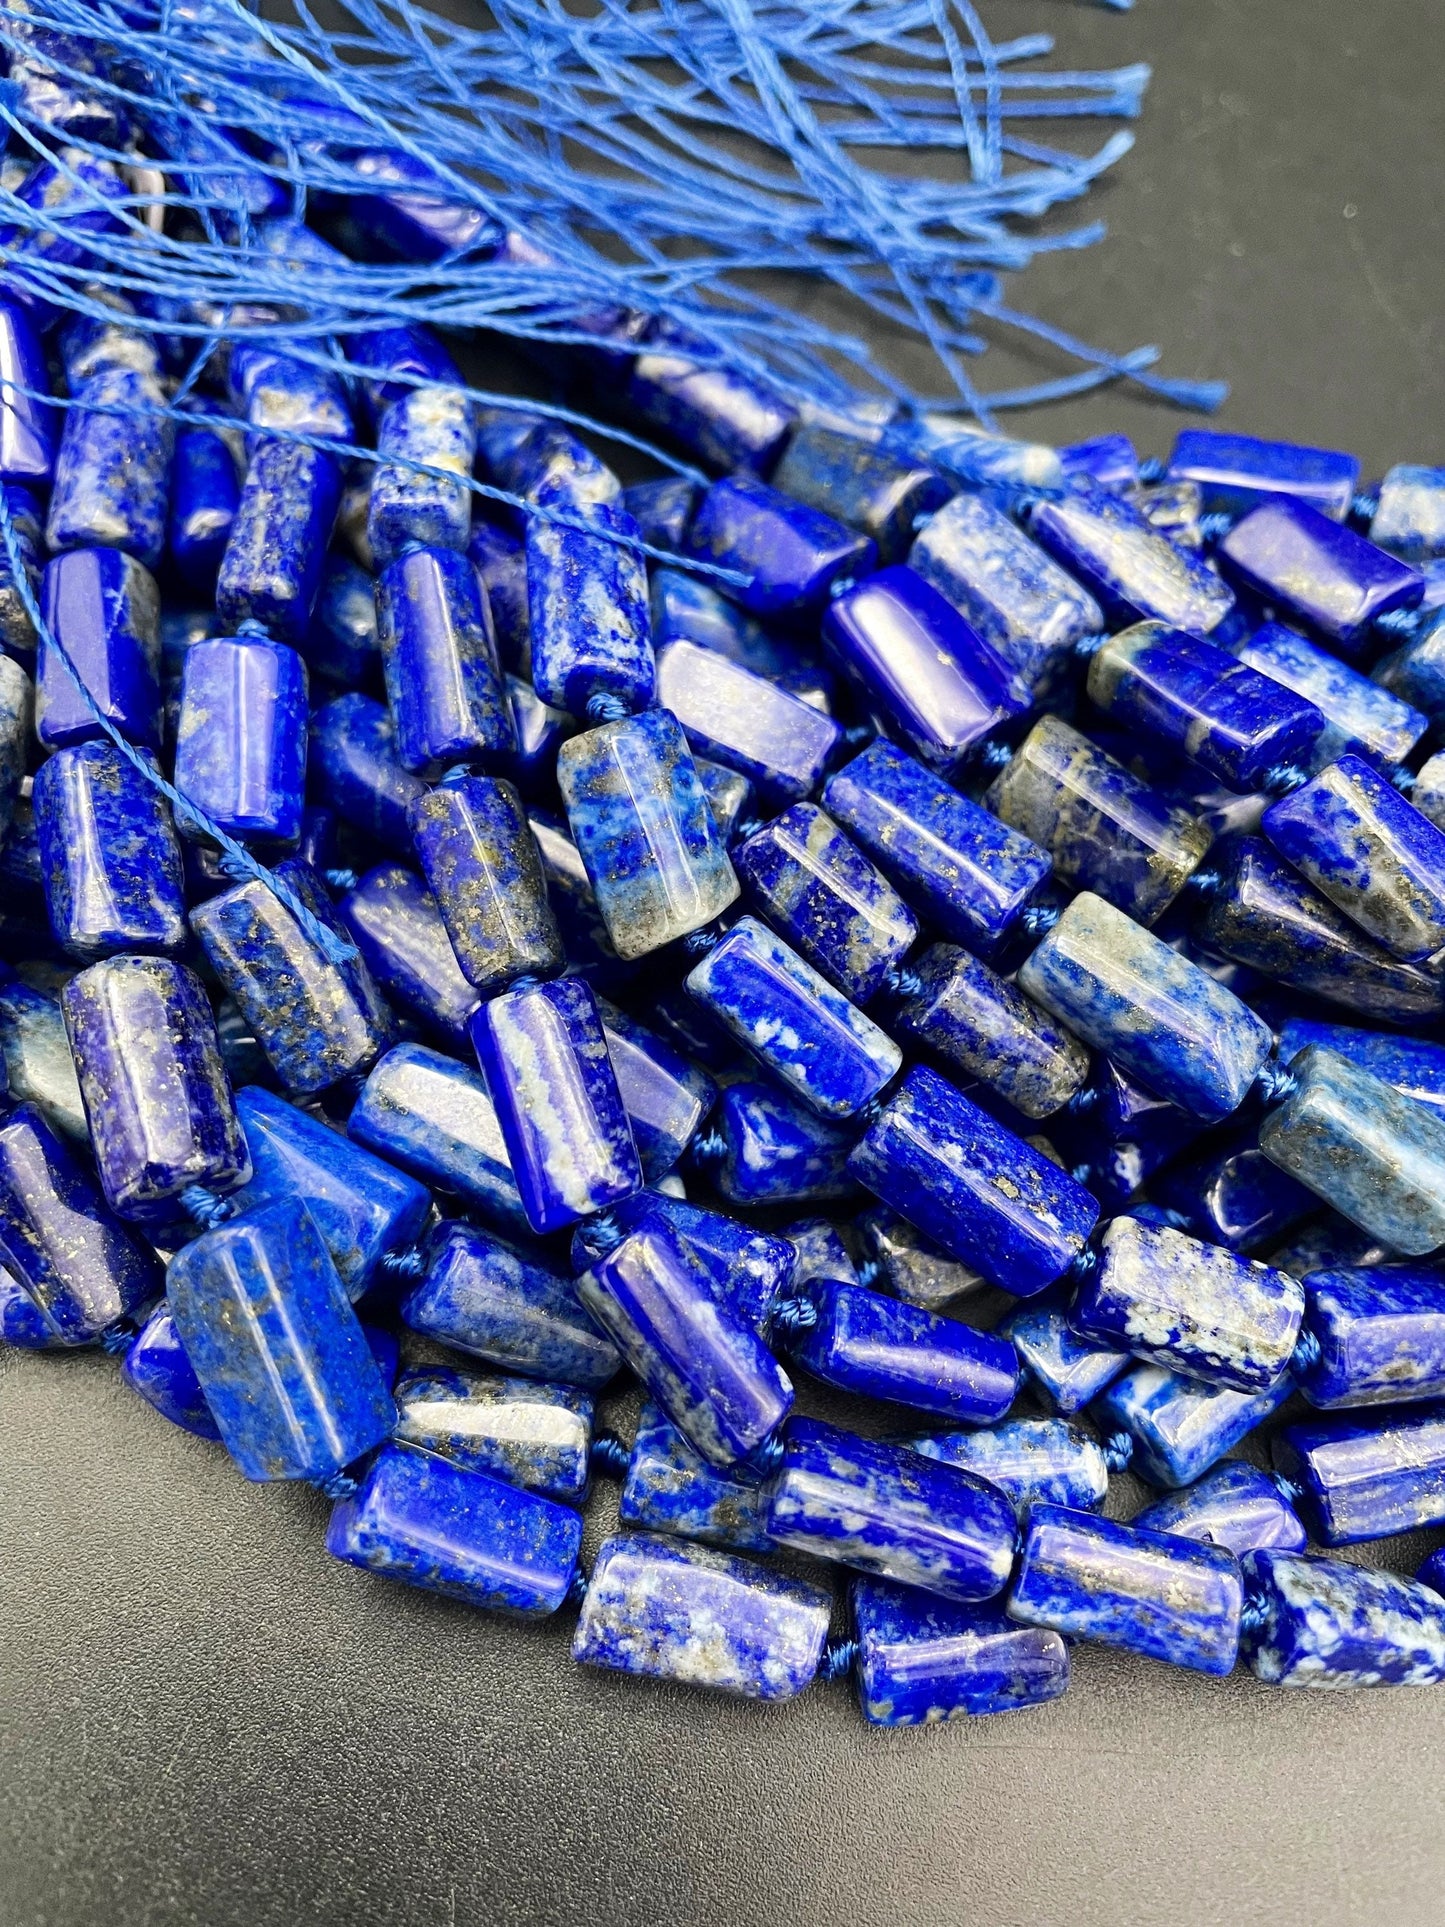 AAA Natural Lapis Lazuli Gemstone Bead Faceted 8x12mm Tube Shape Bead, Gorgeous Natural Royal Blue Color Lapis Lazuli Gemstone bead